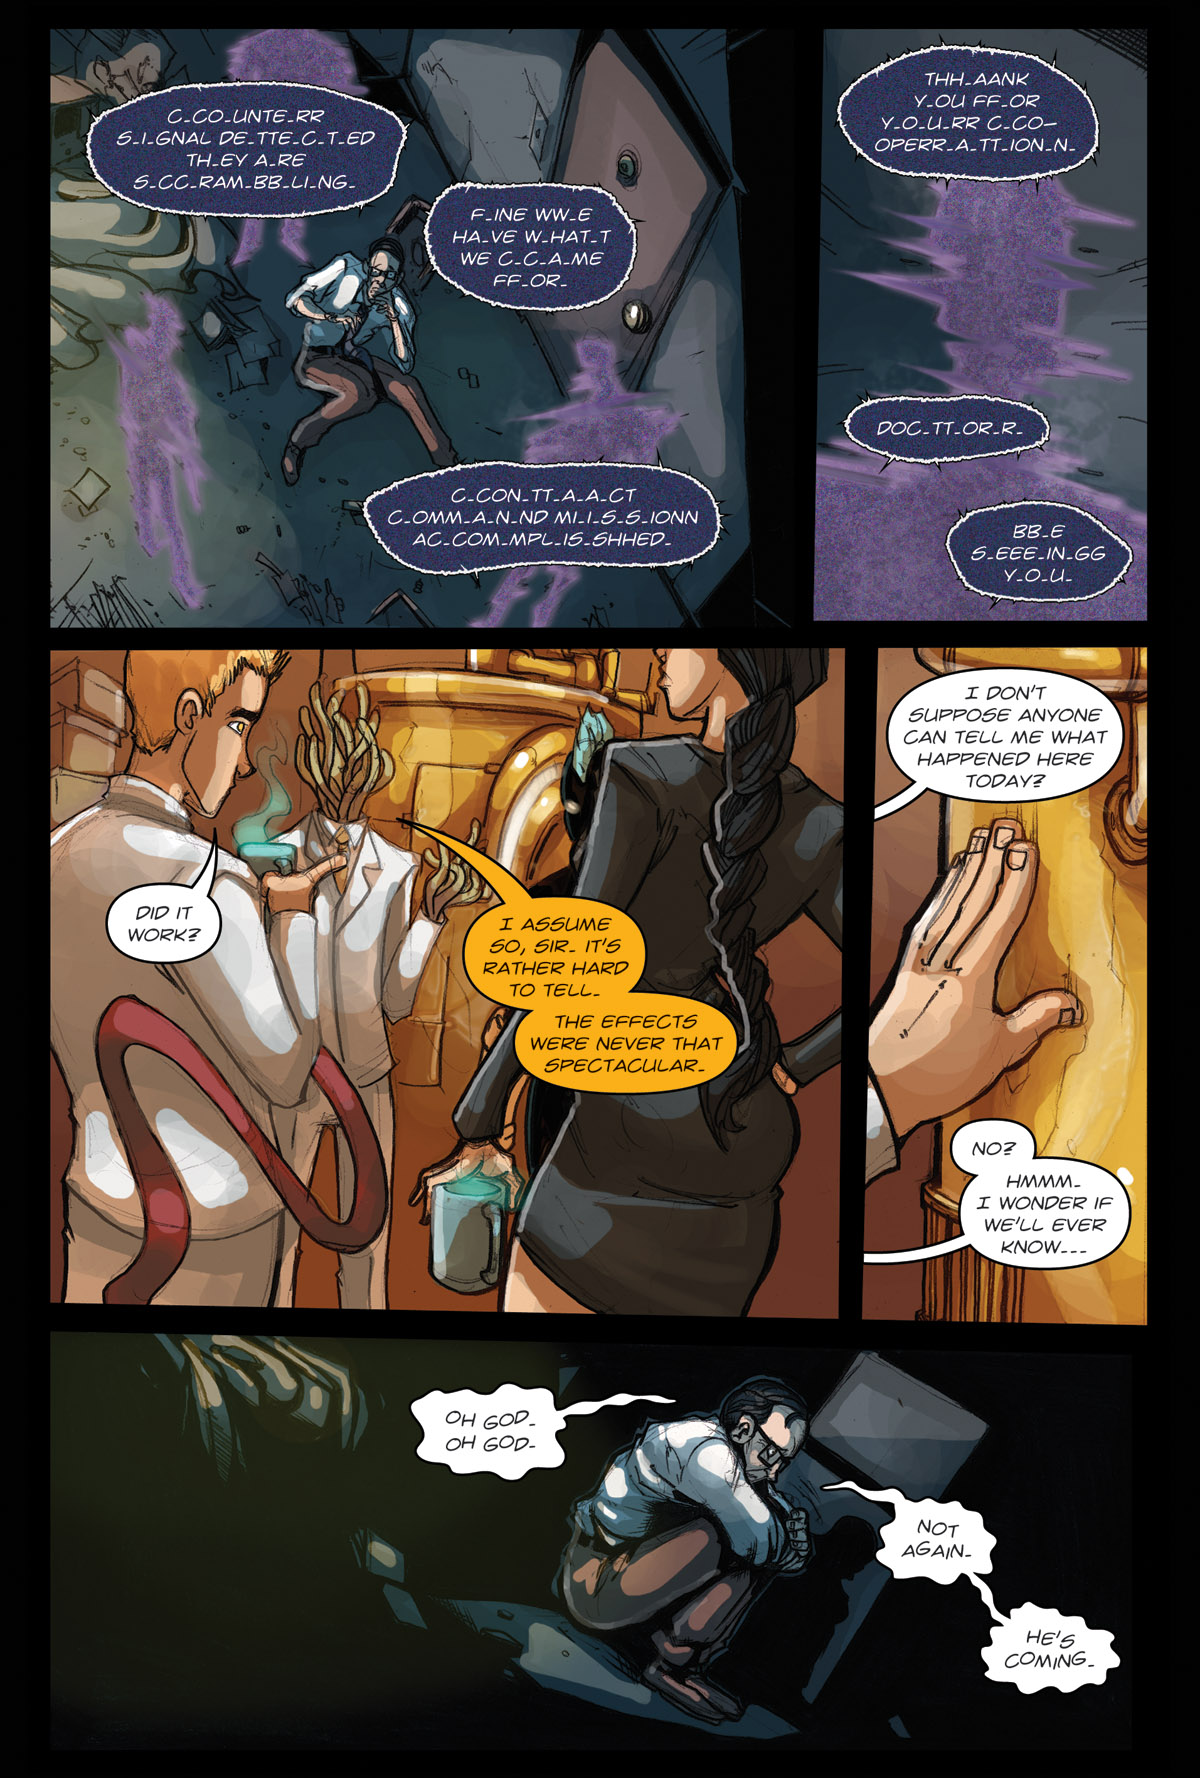 Afterlife Inc. | Near Life | Page 6